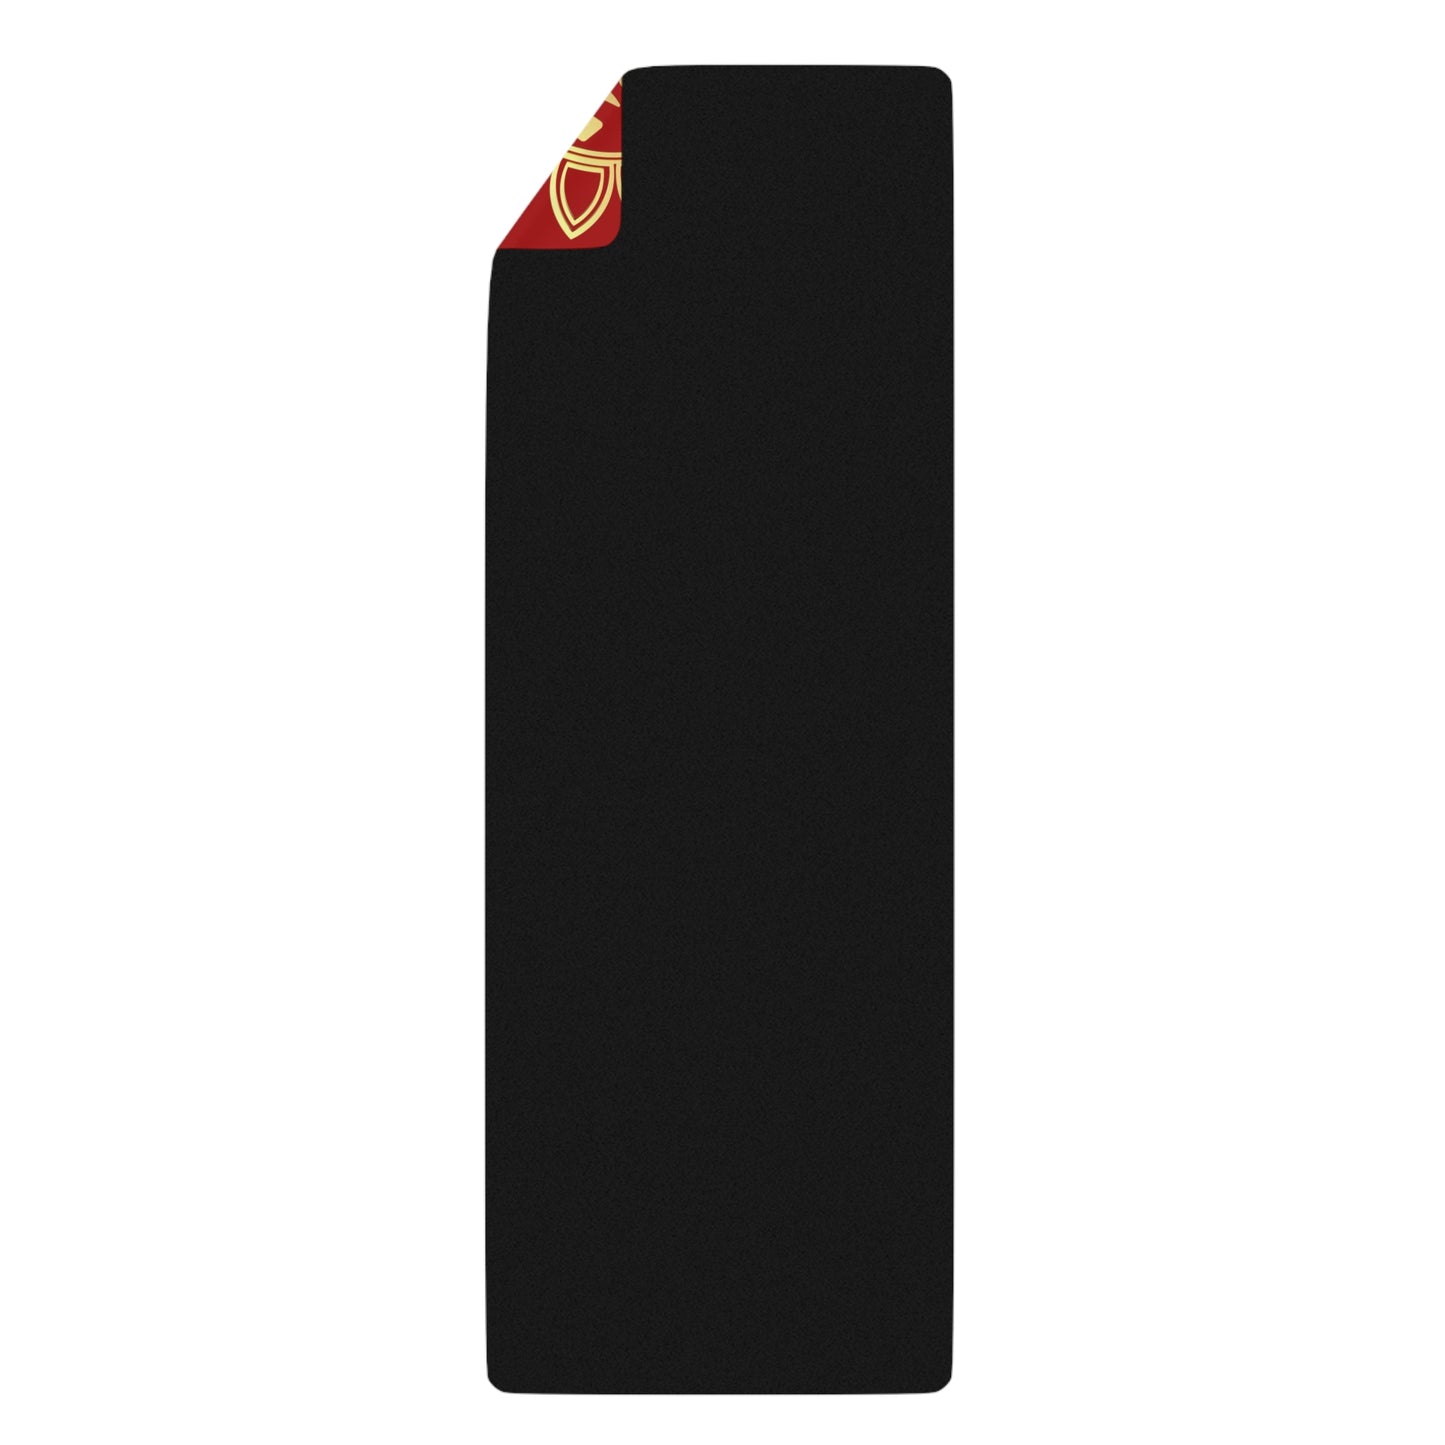 OHM Red Rubber Yoga Mat